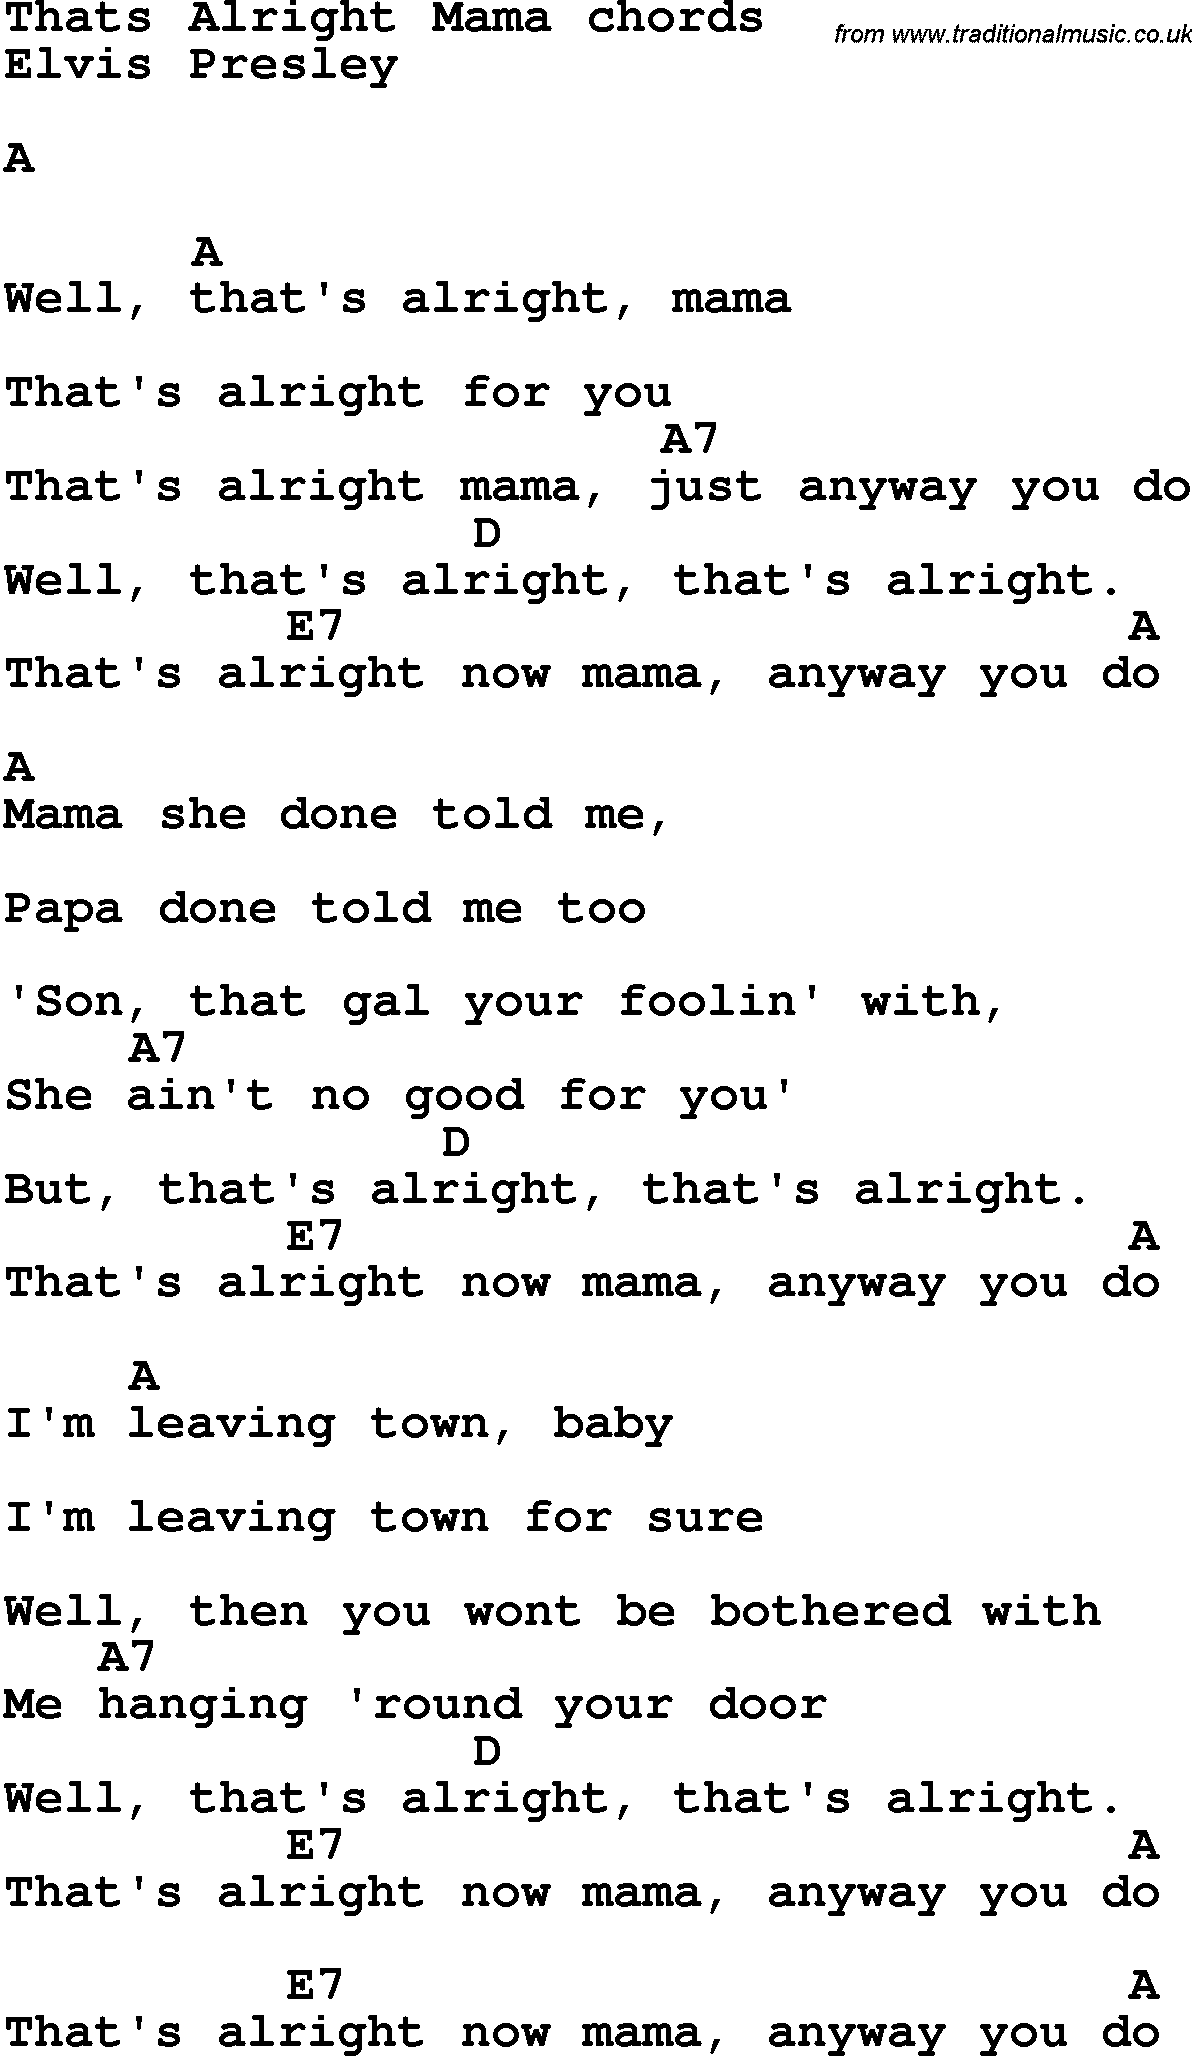 Song Lyrics with guitar chords for That's Alright Mama